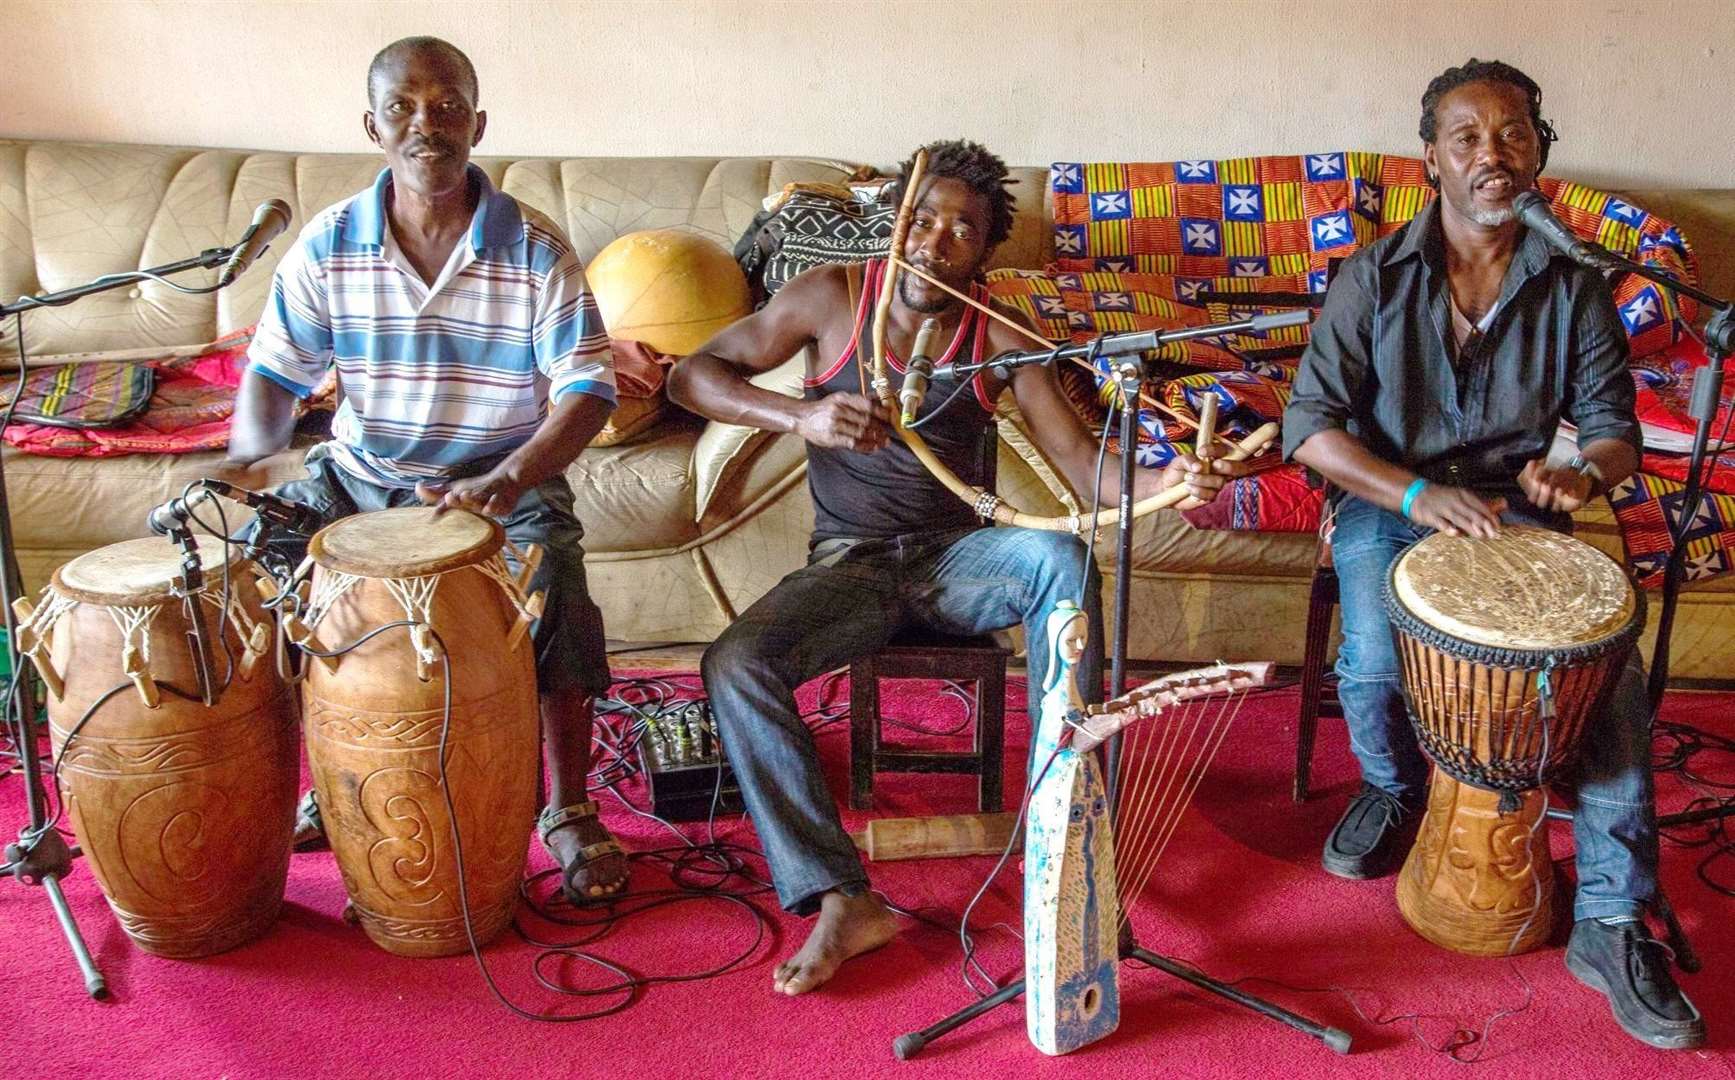 Mbilou at centre is a Bwiti Nganga from Gabon and is featured with Adotey Johnson, left, and Injoly Addo of Kakatsitsi.